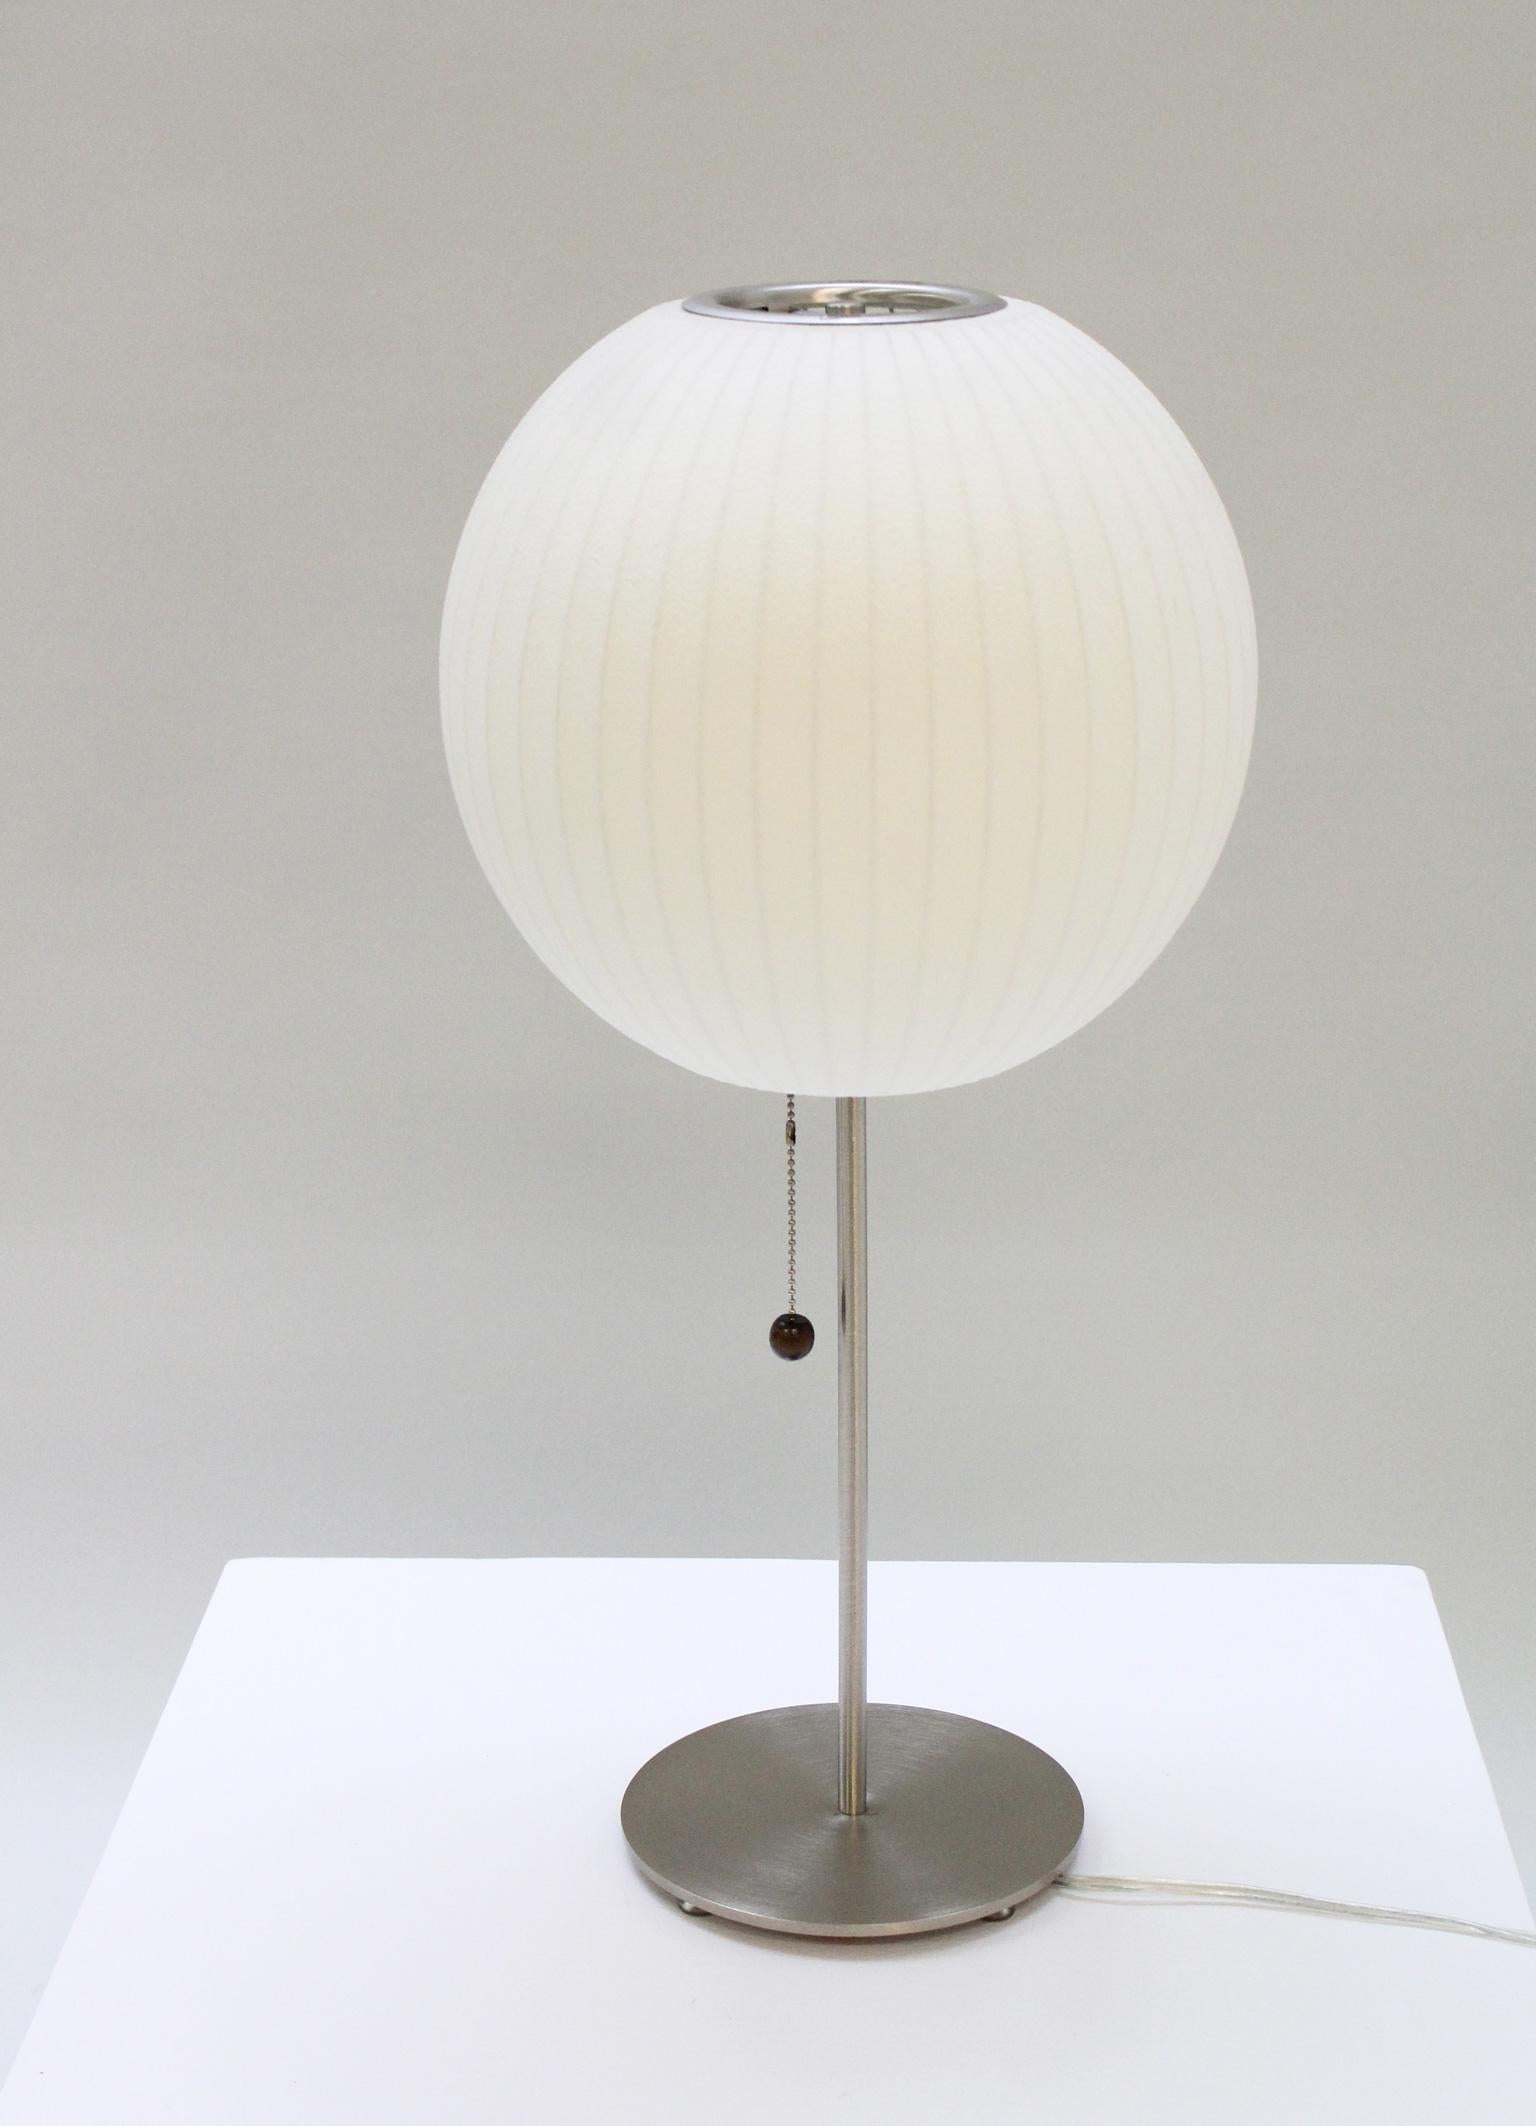 Bubble table lamp designed by George Nelson in 1947-50, USA. Polished steel base and metal and vinyl shade. This is a Modernica edition.